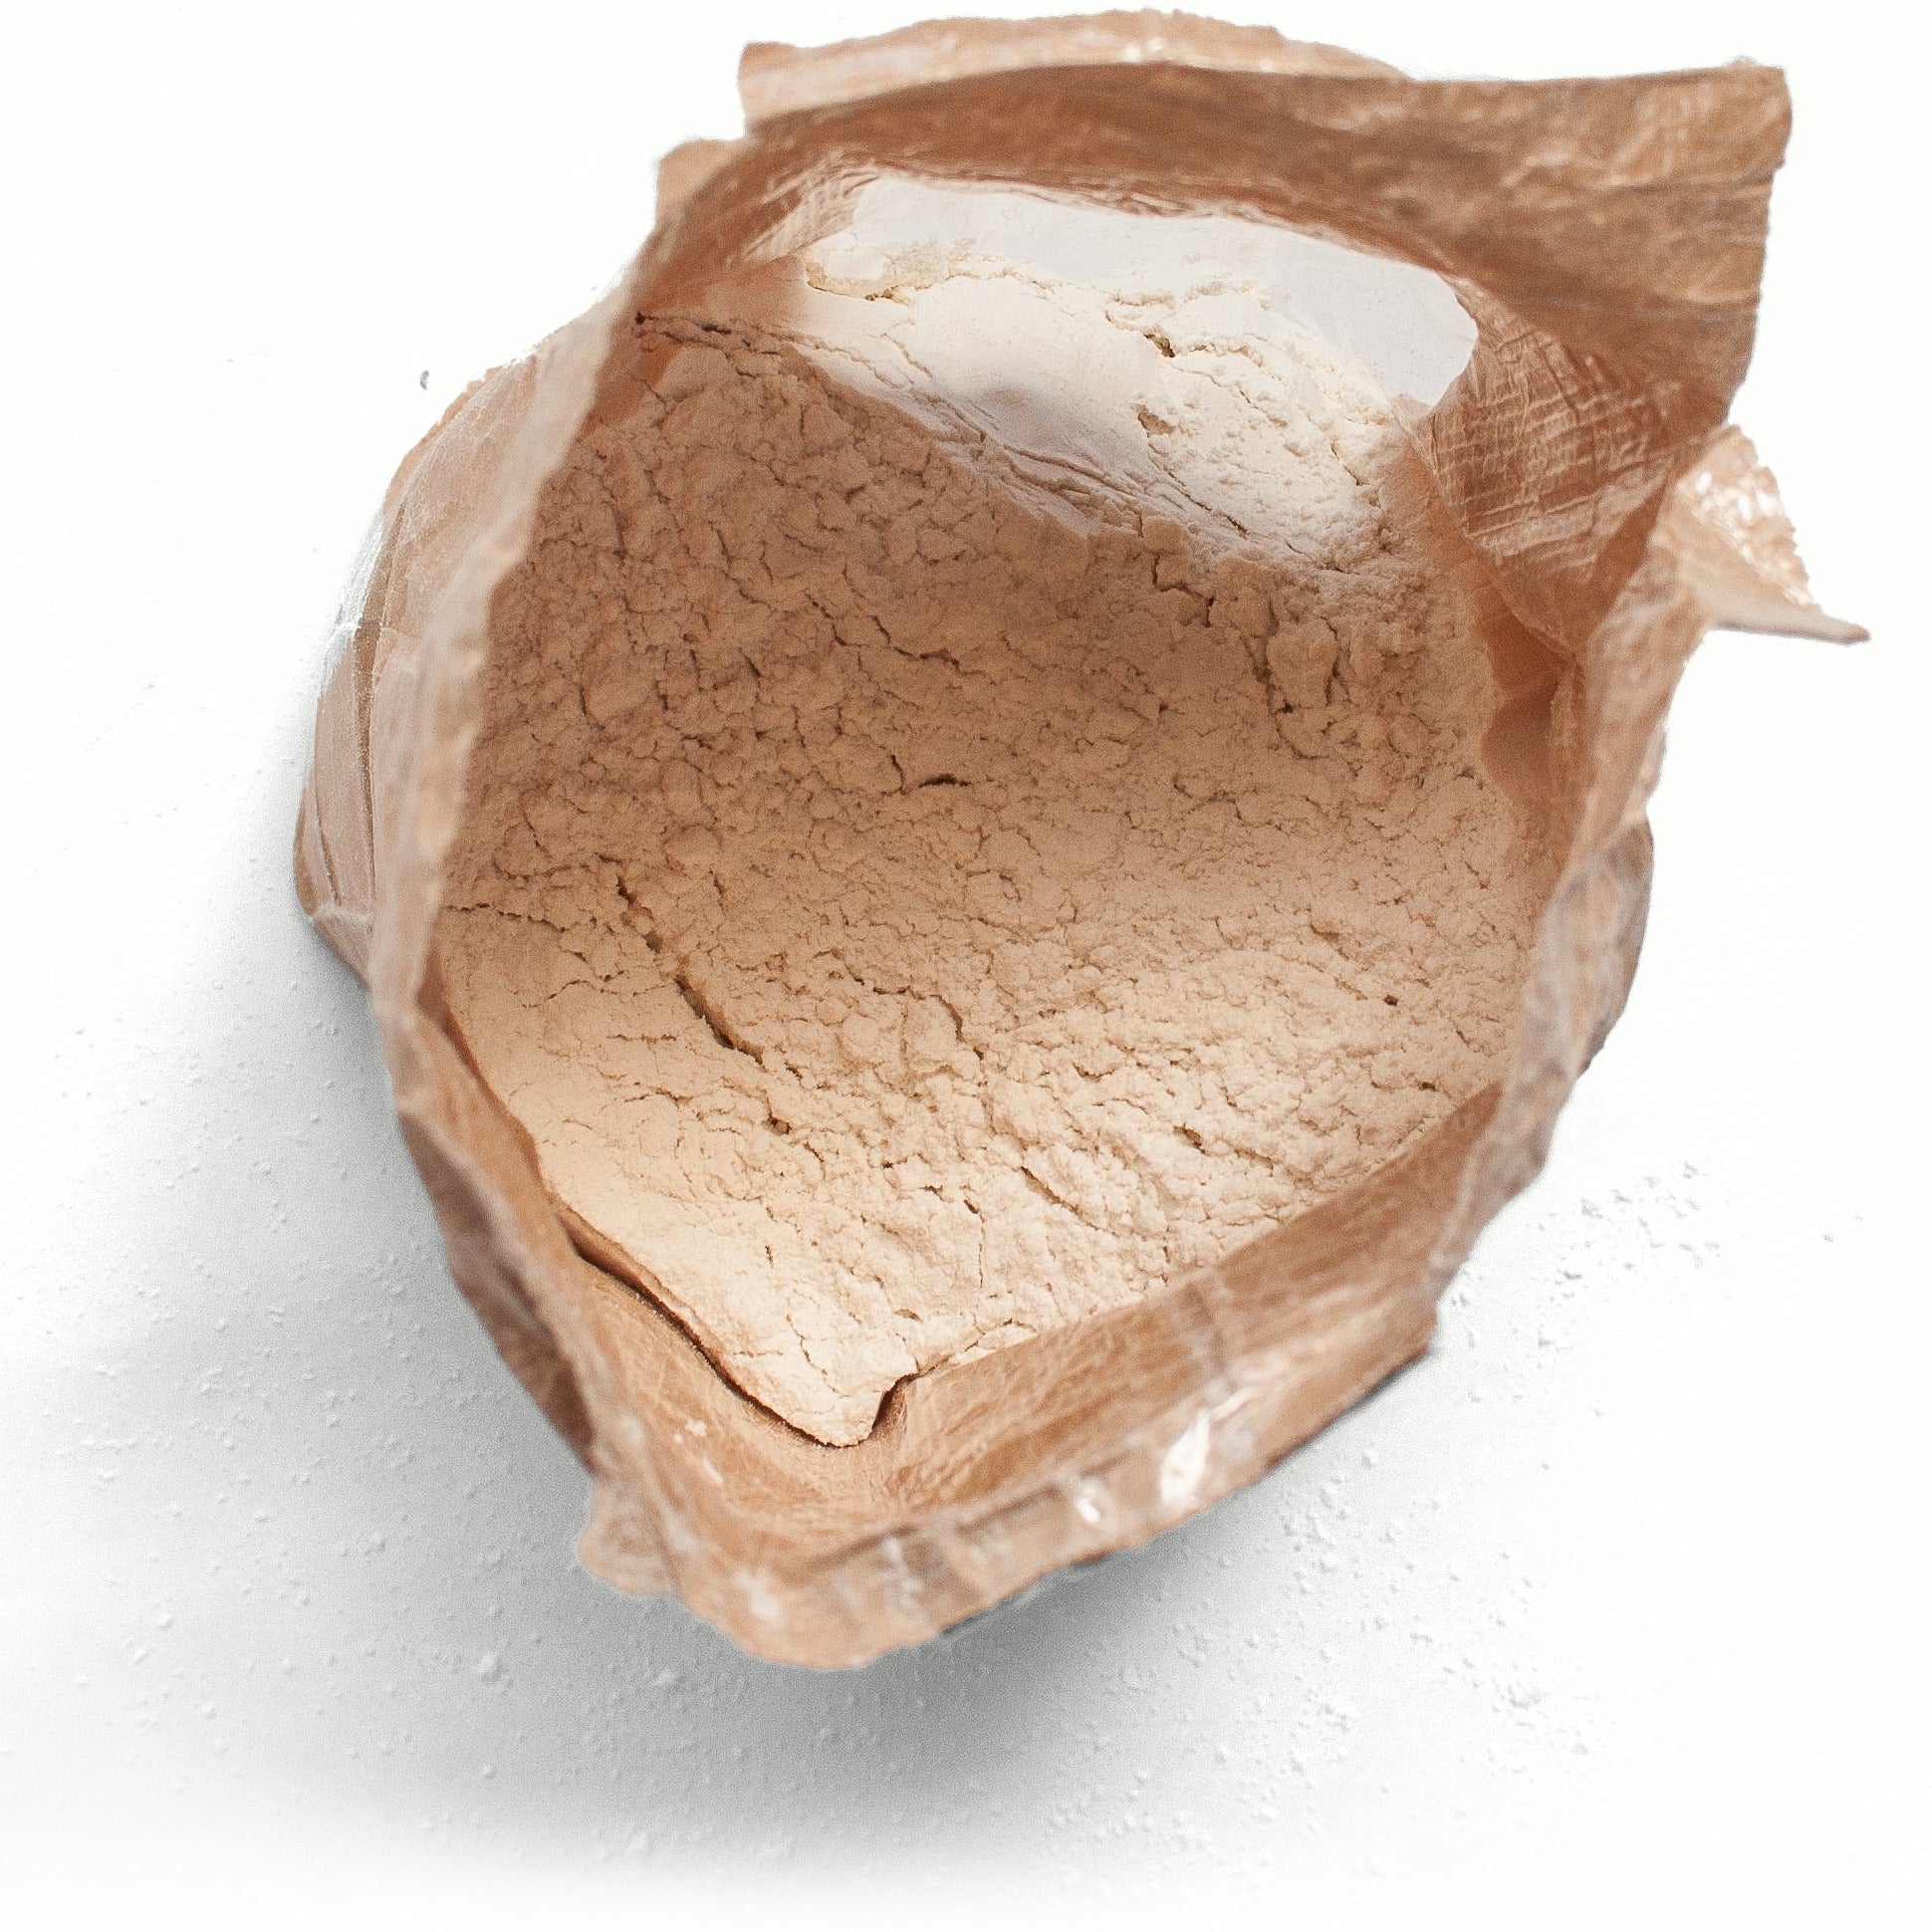 image of the inside of the bag of flour. the flour is a creamy white powder